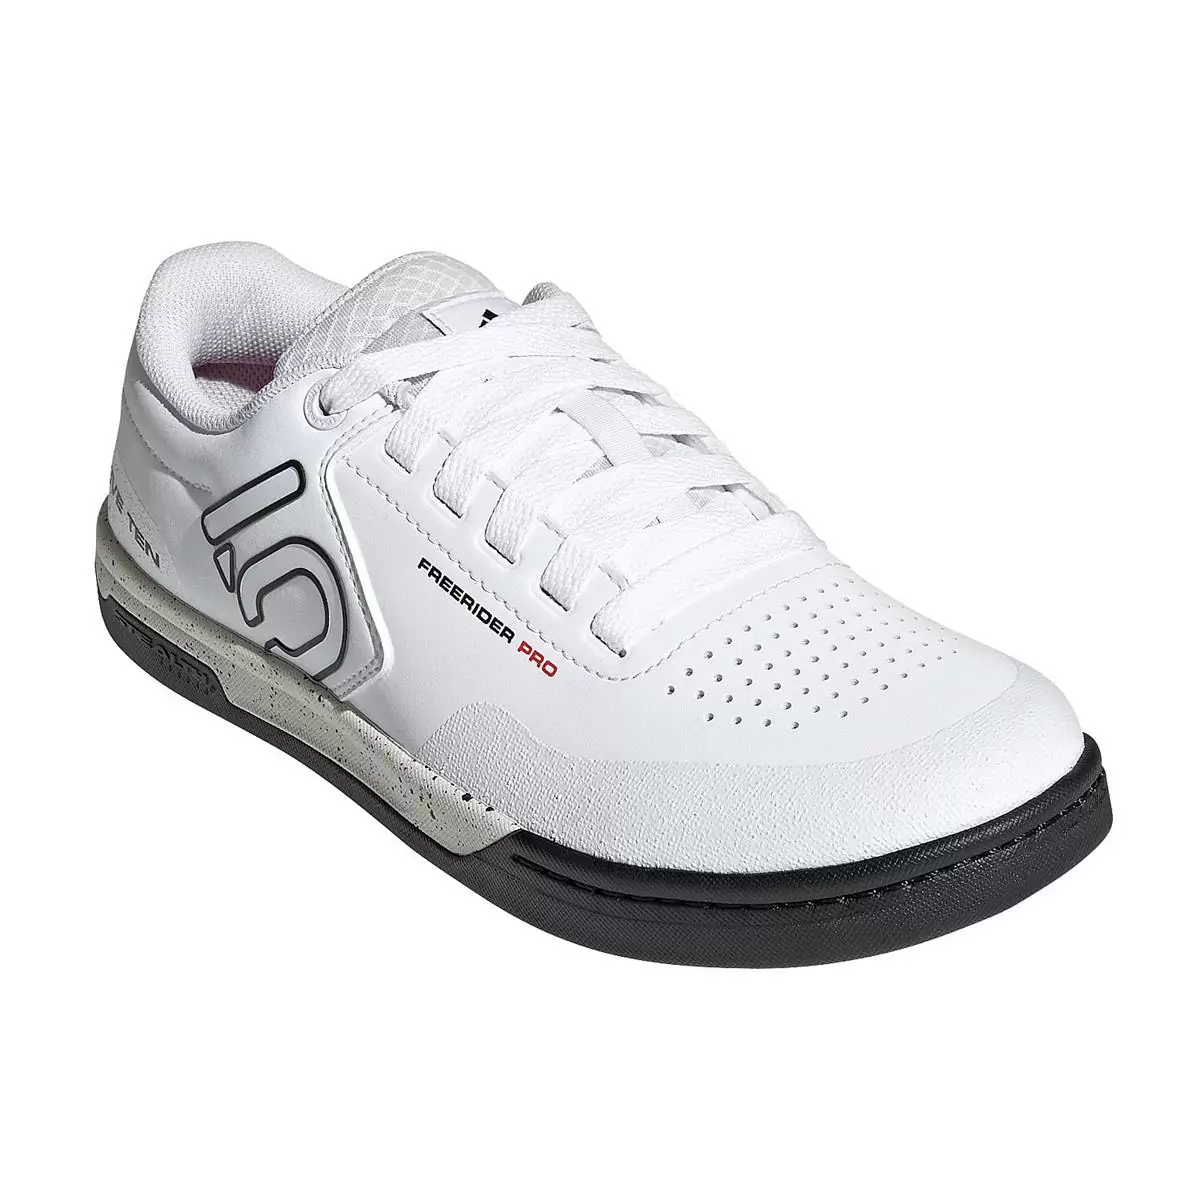 Chaussures Plates VTT Freerider Pro KYX44 Blanc Taille 48 #1